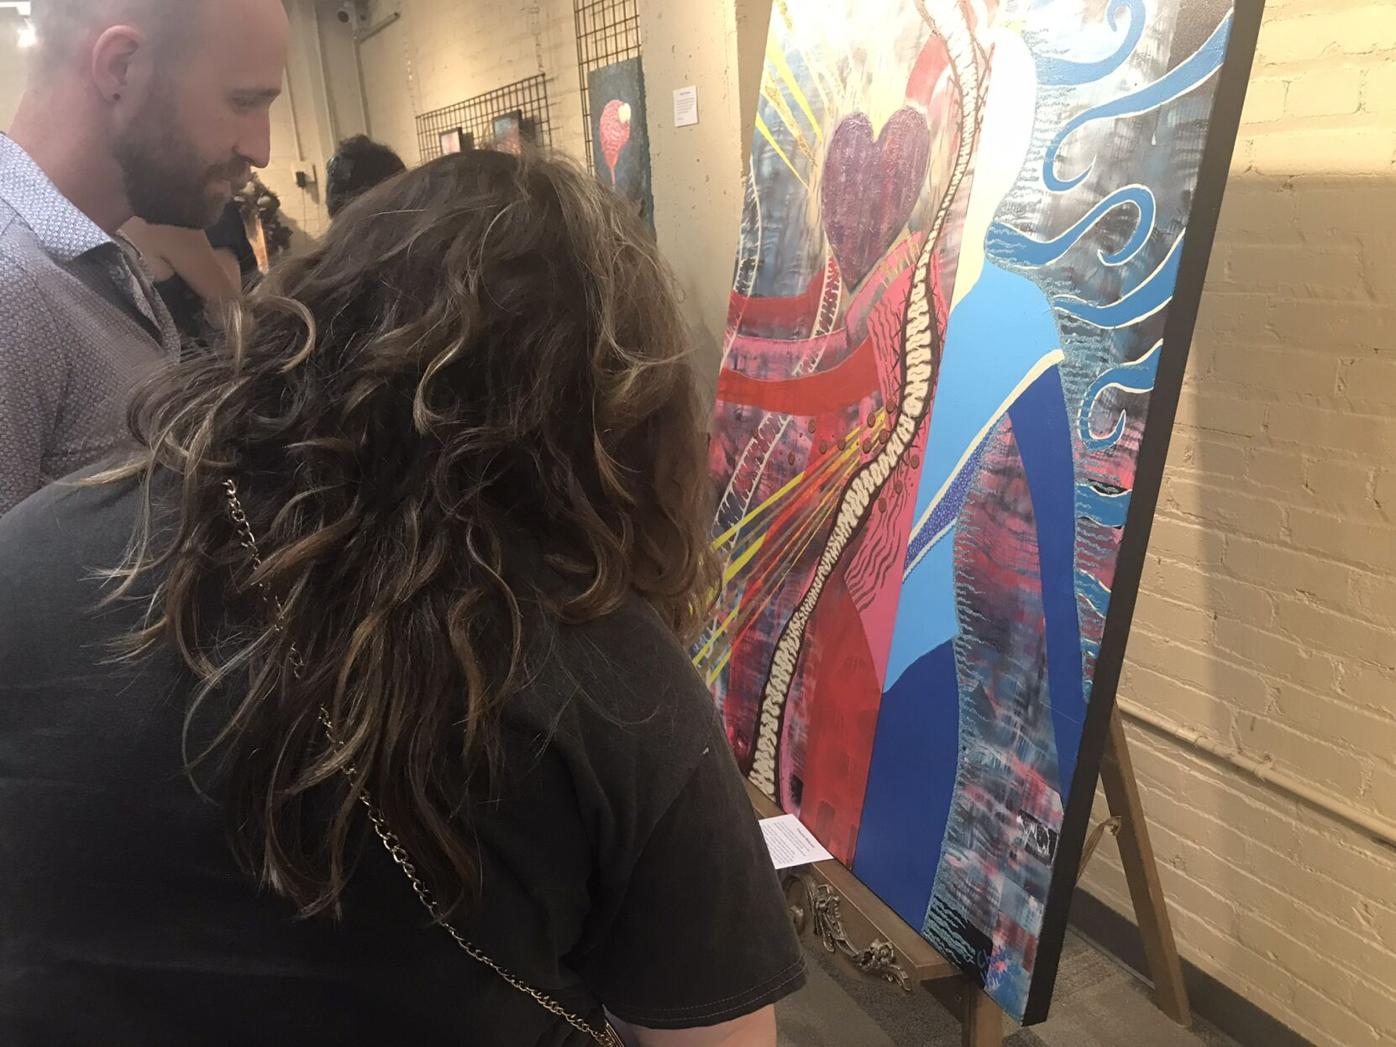 Tulsa artist opens 'perplexing' and 'ethereal' art show 'Love Yo Self', Entertainment